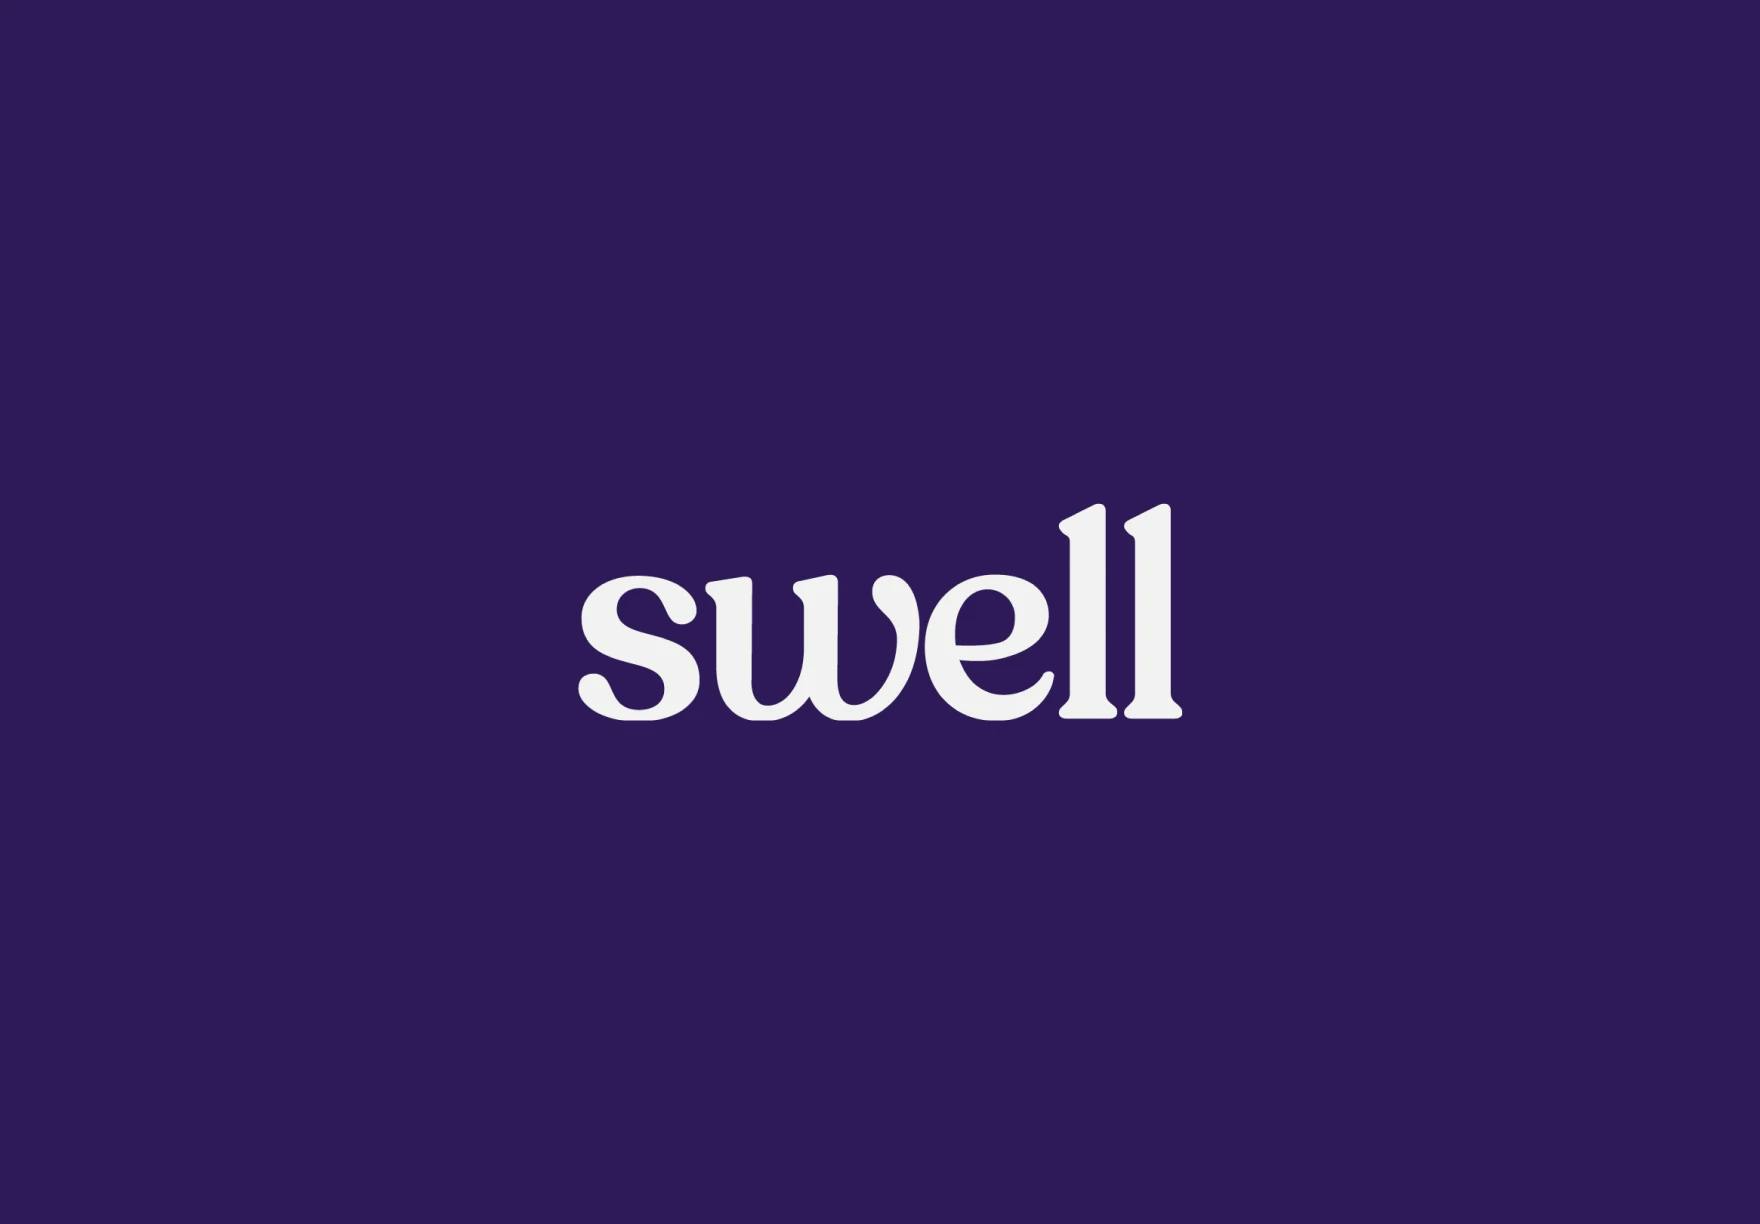 Stefan Kende at Swell trusts Remote to help his business grow